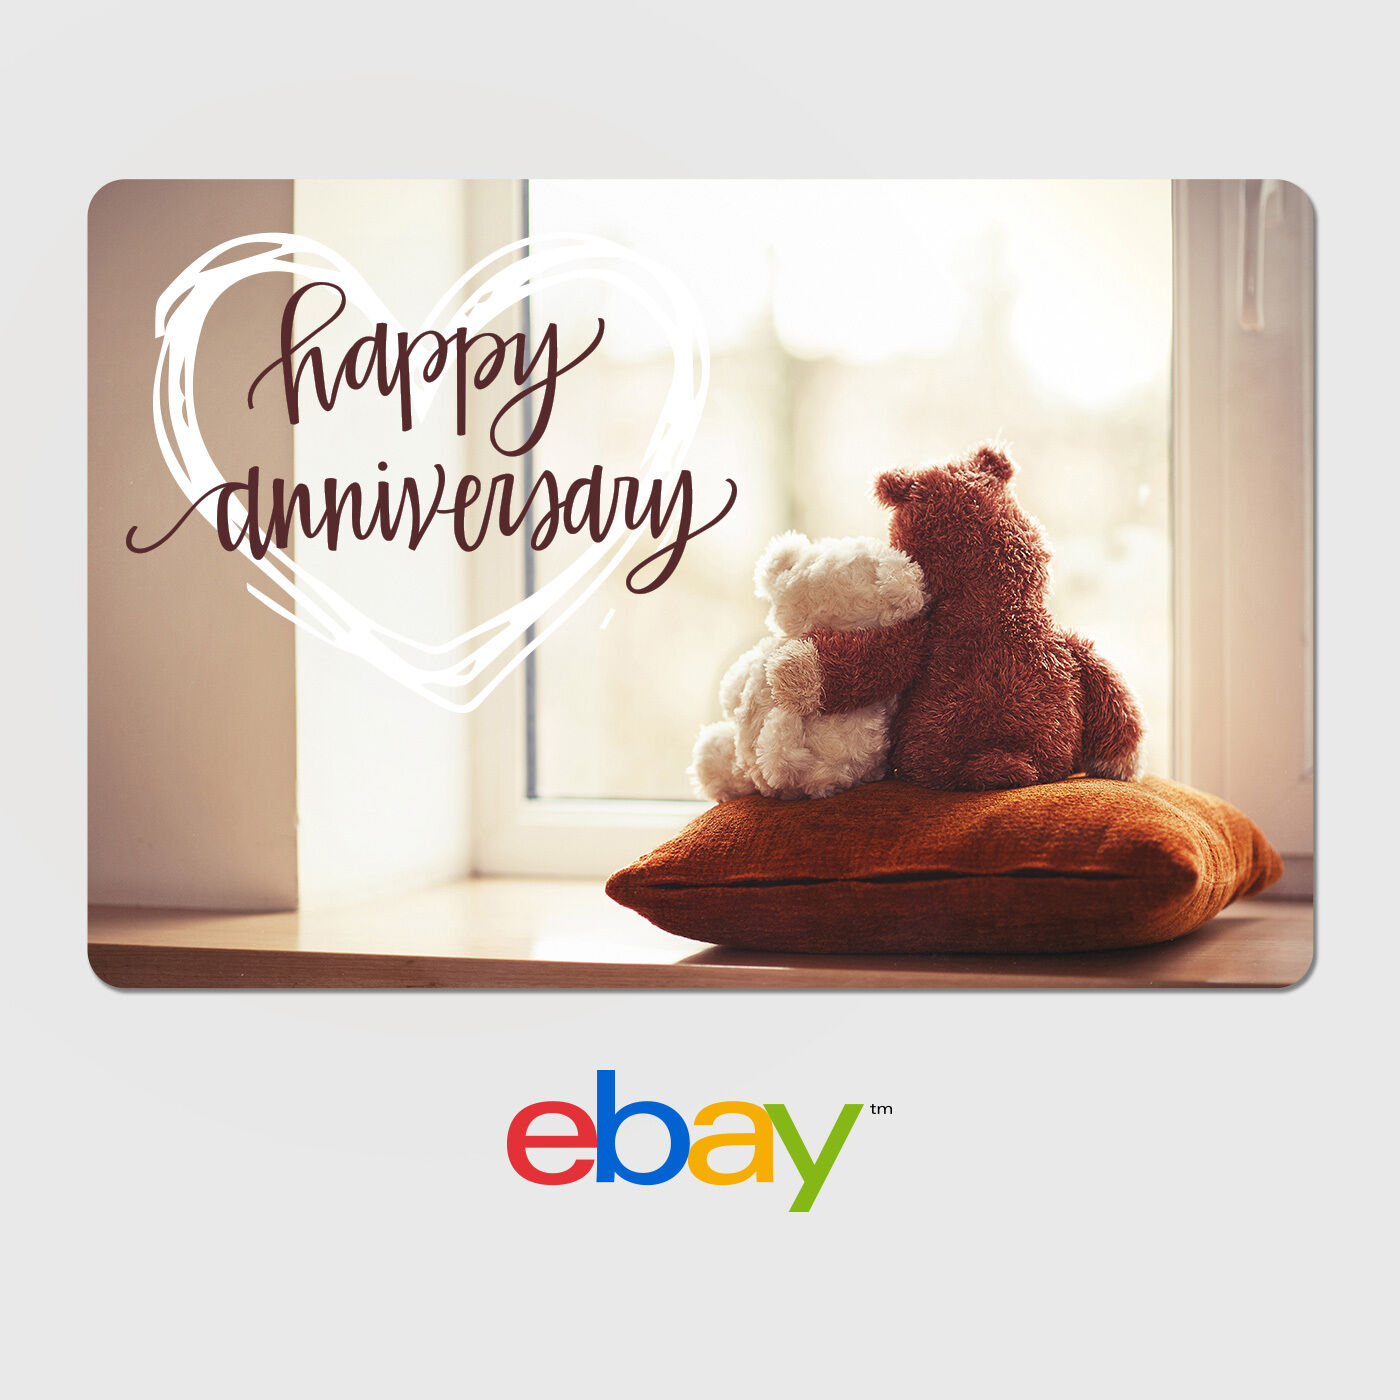 Ebay Digital Gift Card - Anniversary Designs - Email Delivery